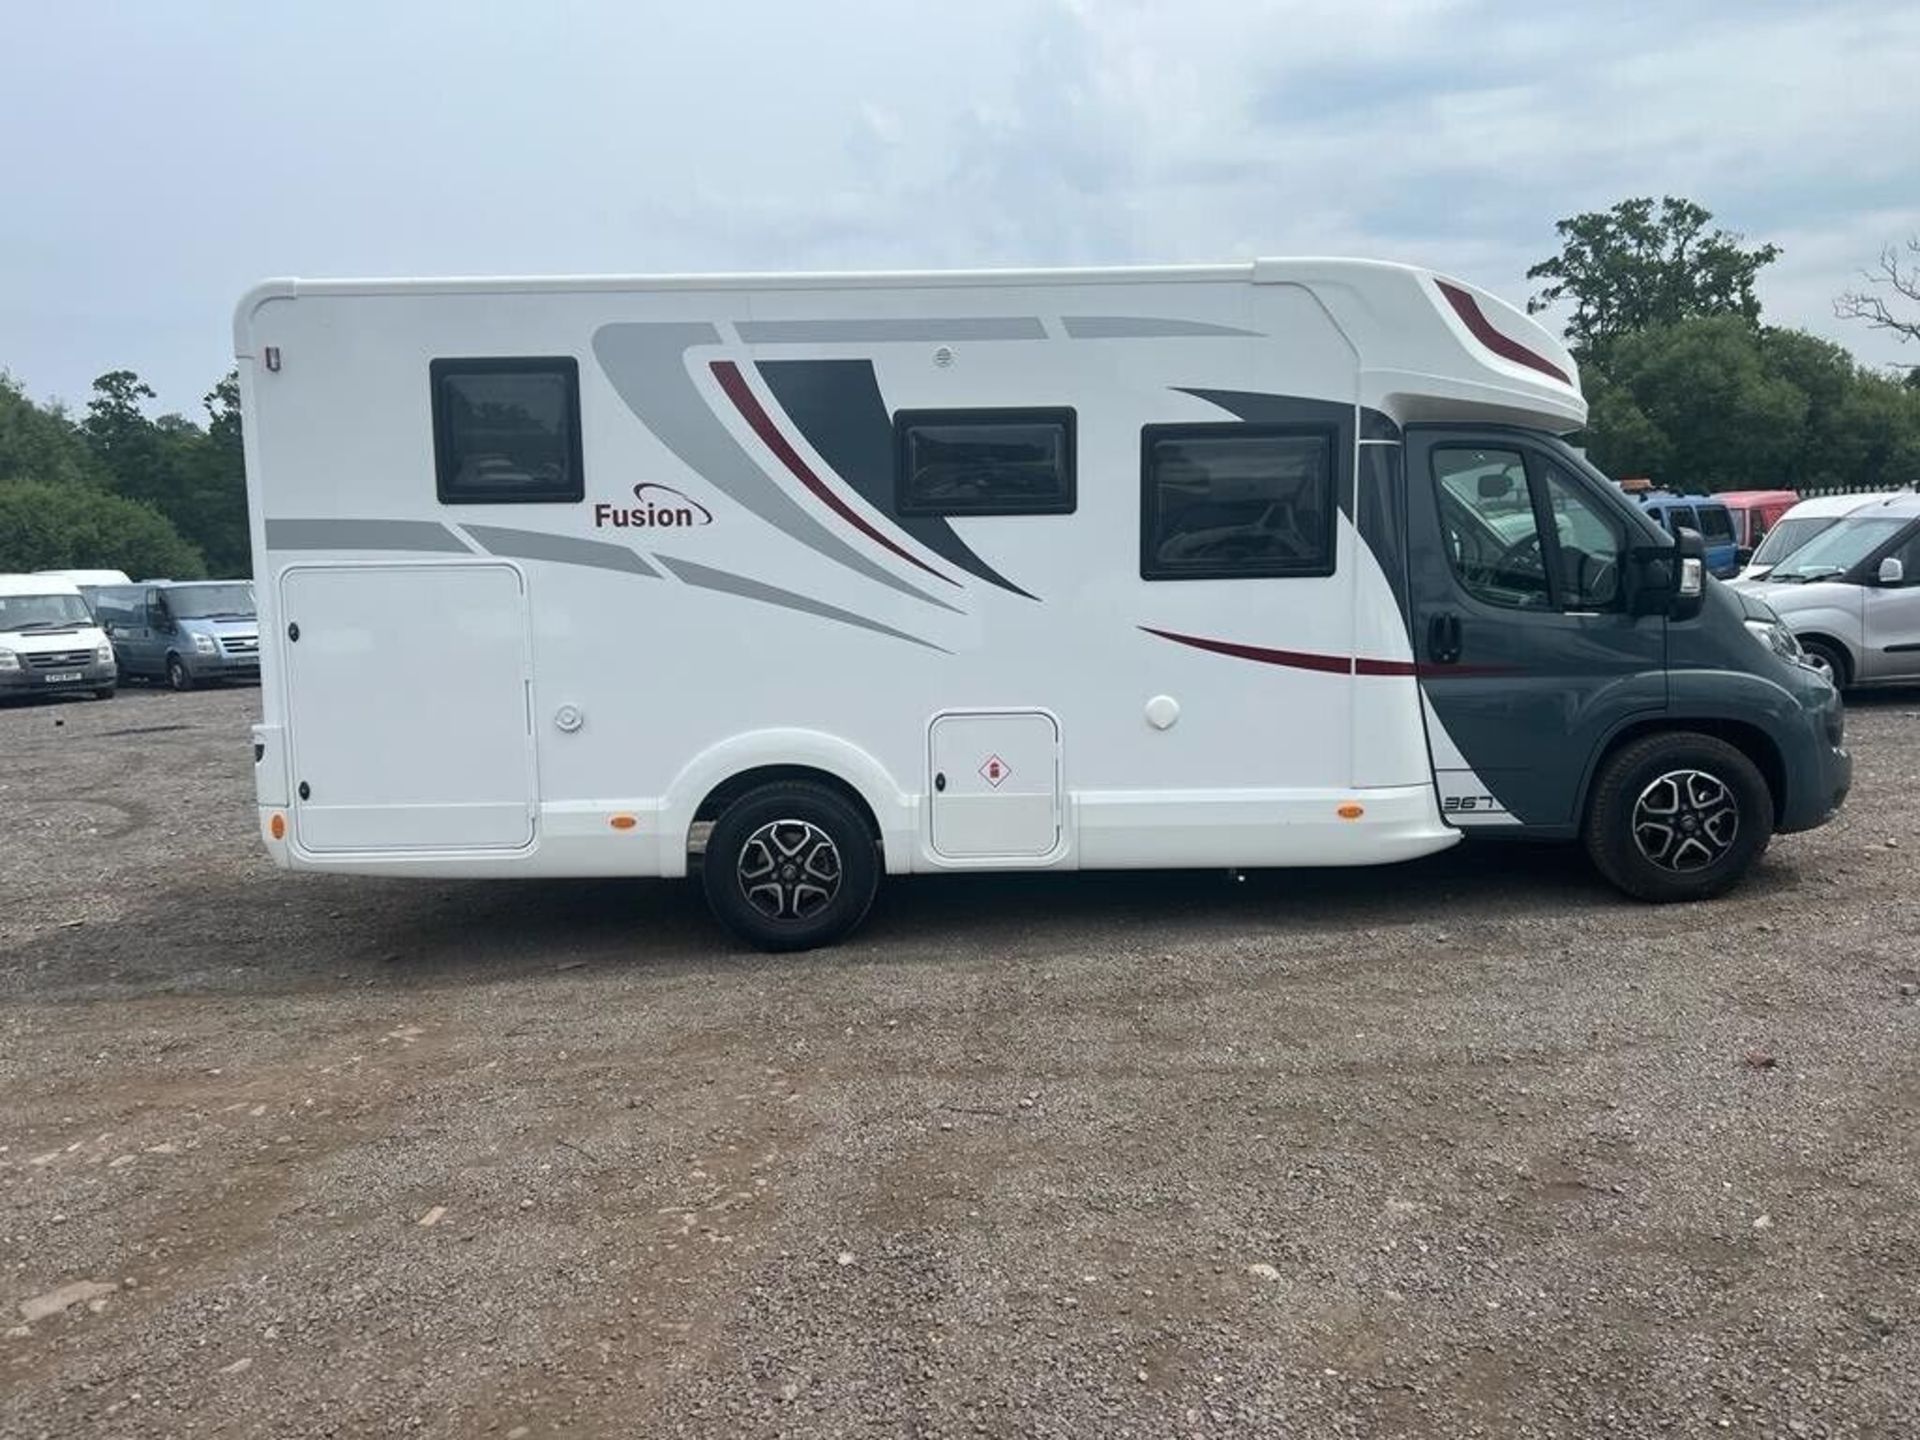 72 PLATE - ONLY 750 MILES! FIAT MCLOUIS FUSION 367: IMMACULATE MOTORHOME JOY >NO VAT ON HAMMER< - Image 14 of 15